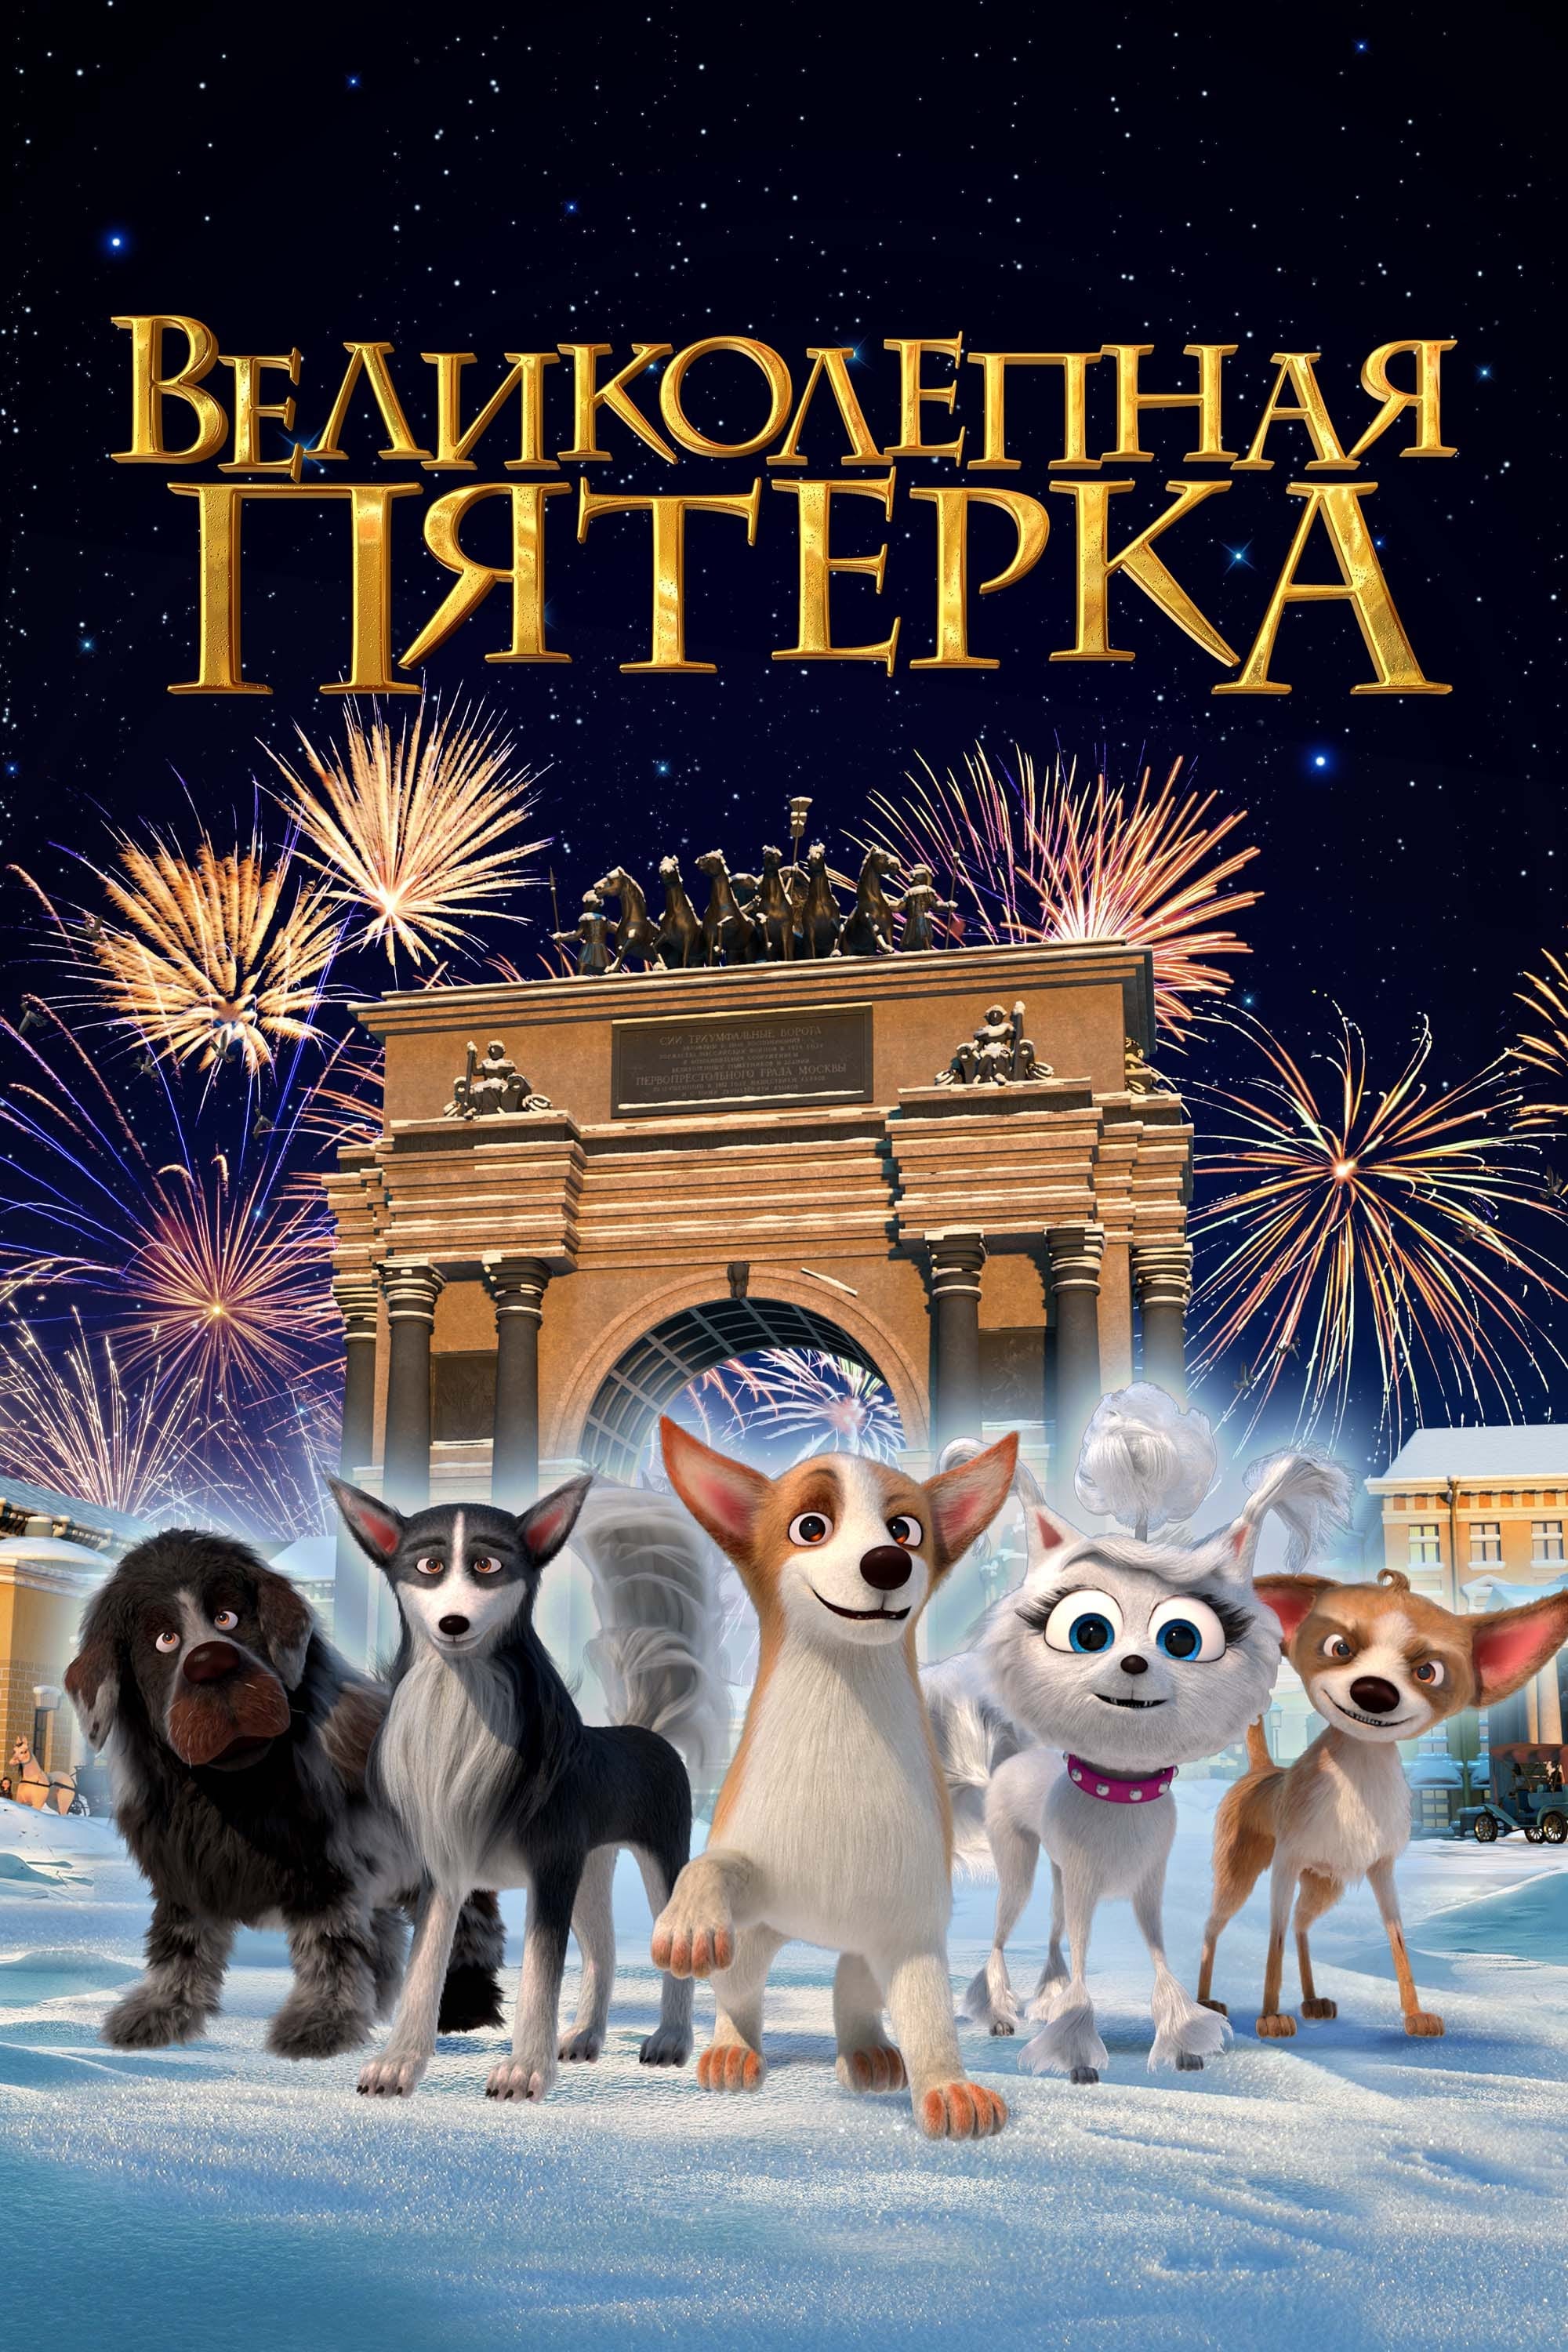 Dogs at the Opera